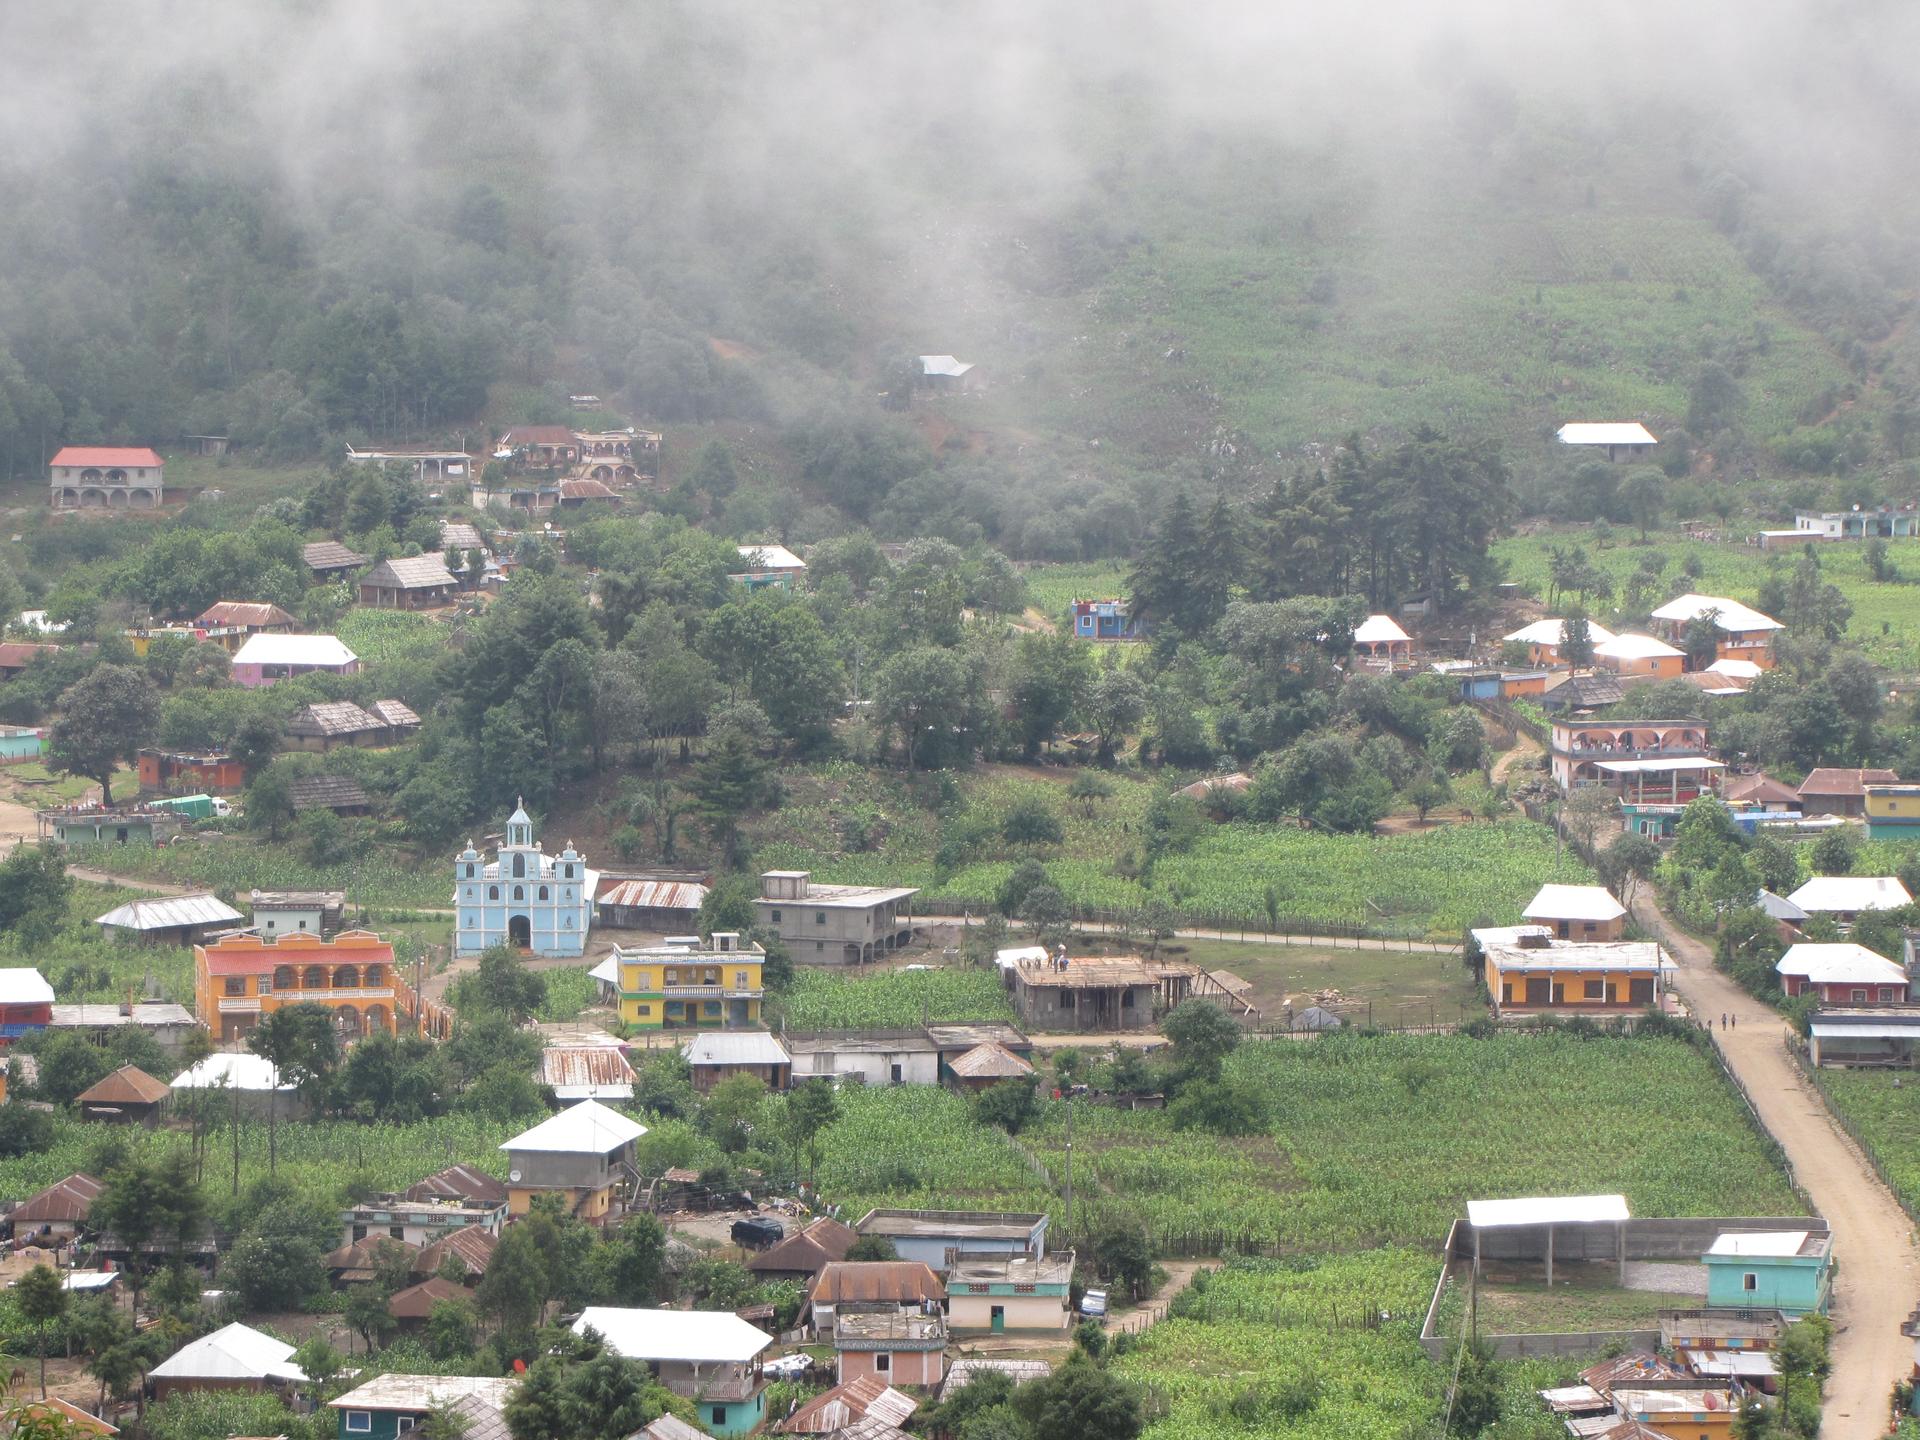 'A wide variety of churches now dot the misty landscape of Guatemala's Western Highlands.'